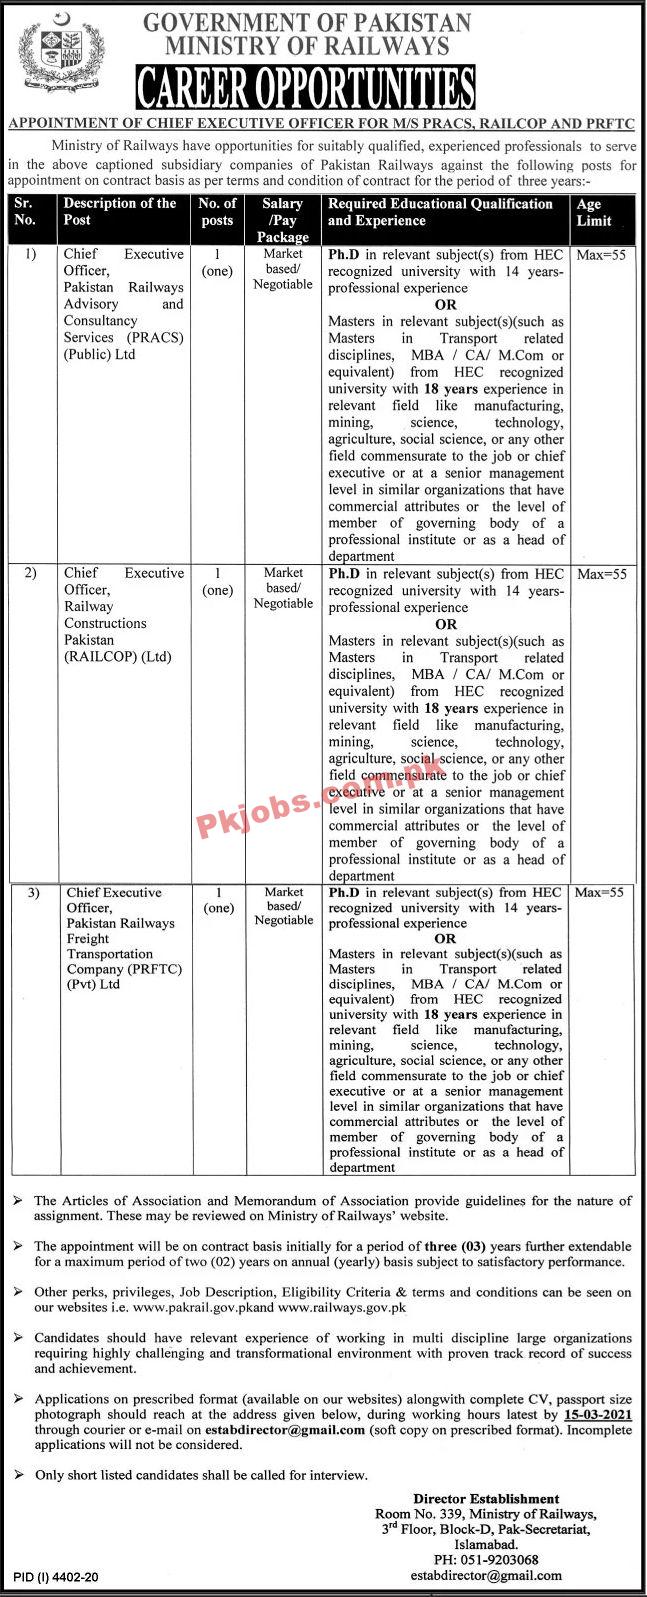 Jobs in Government of Pakistan Ministry of Railways